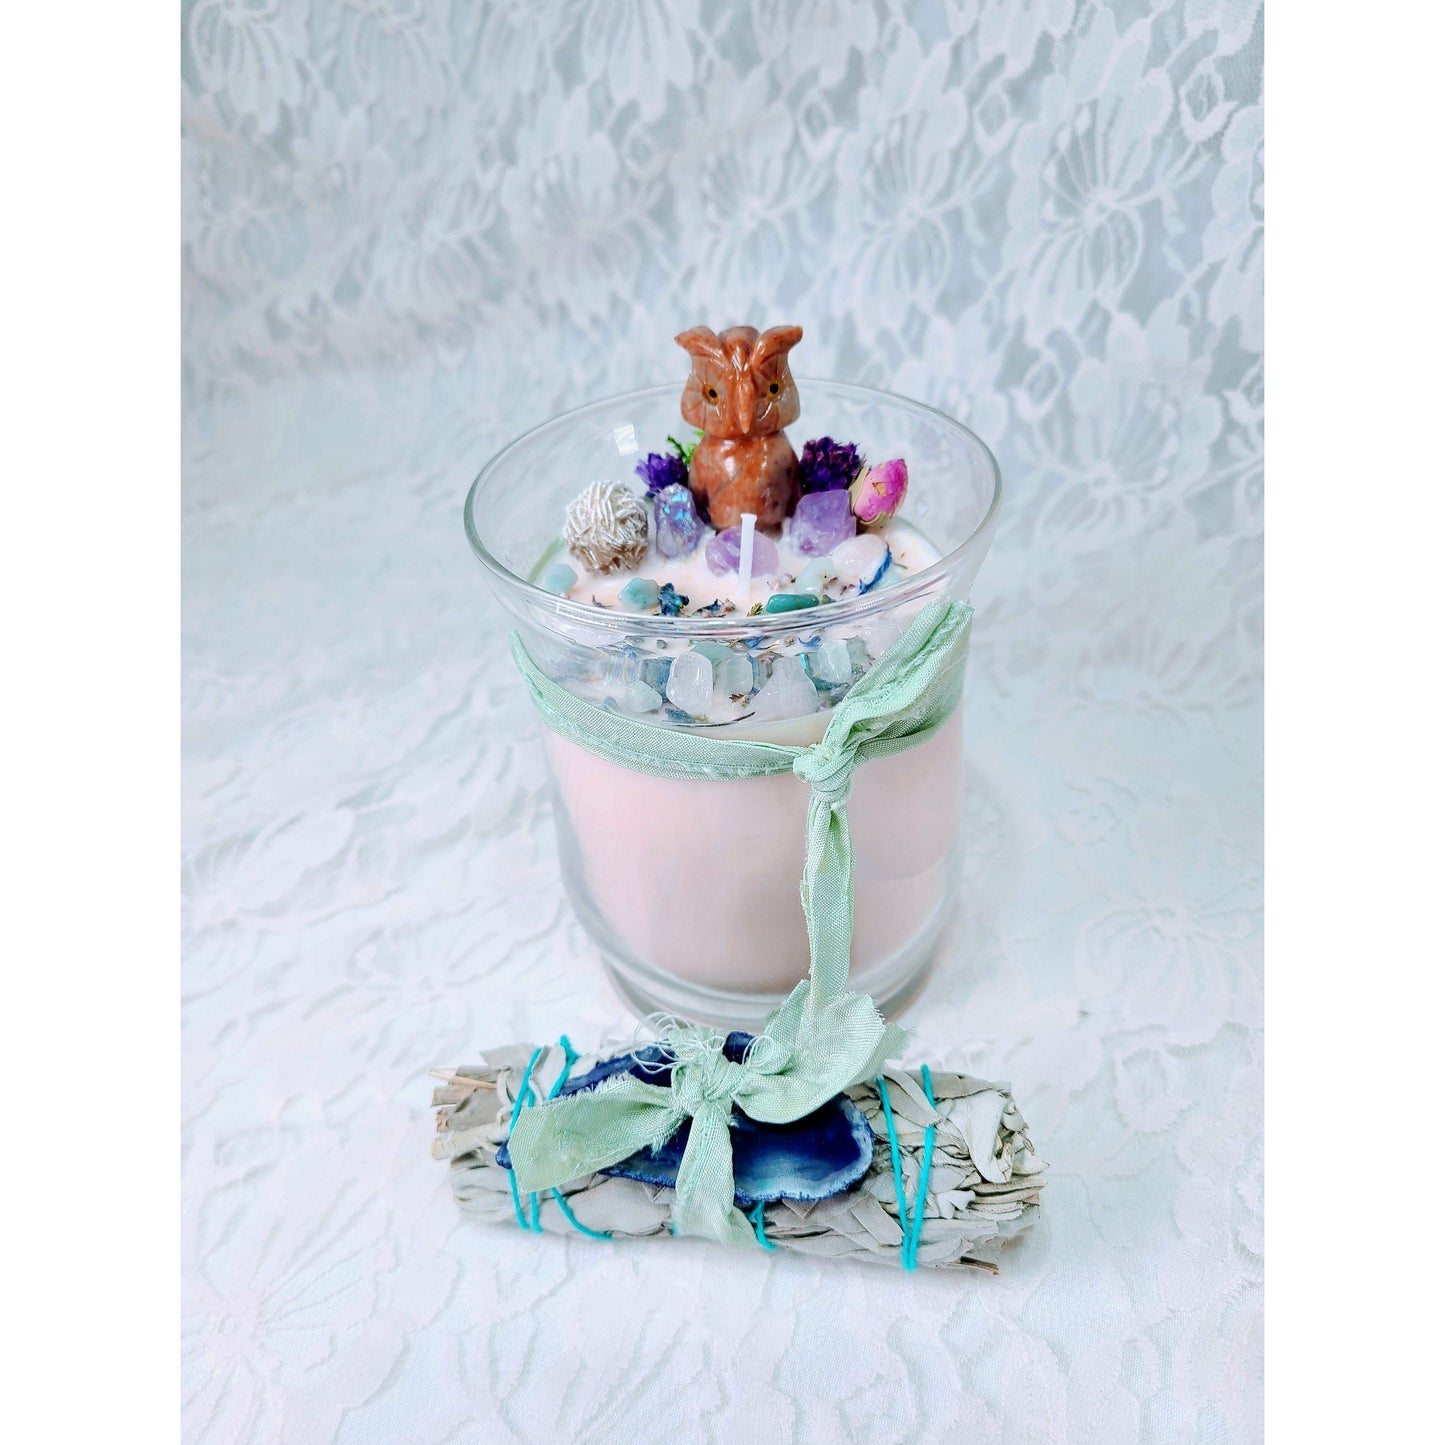 ON SALE! Home Blessing Gift Set ~ BIG Crystal Candle with Silk Wrapped Sage Bundle ~ Carved Agate Owl ~ Soy Wax Candle & Charged Crystals